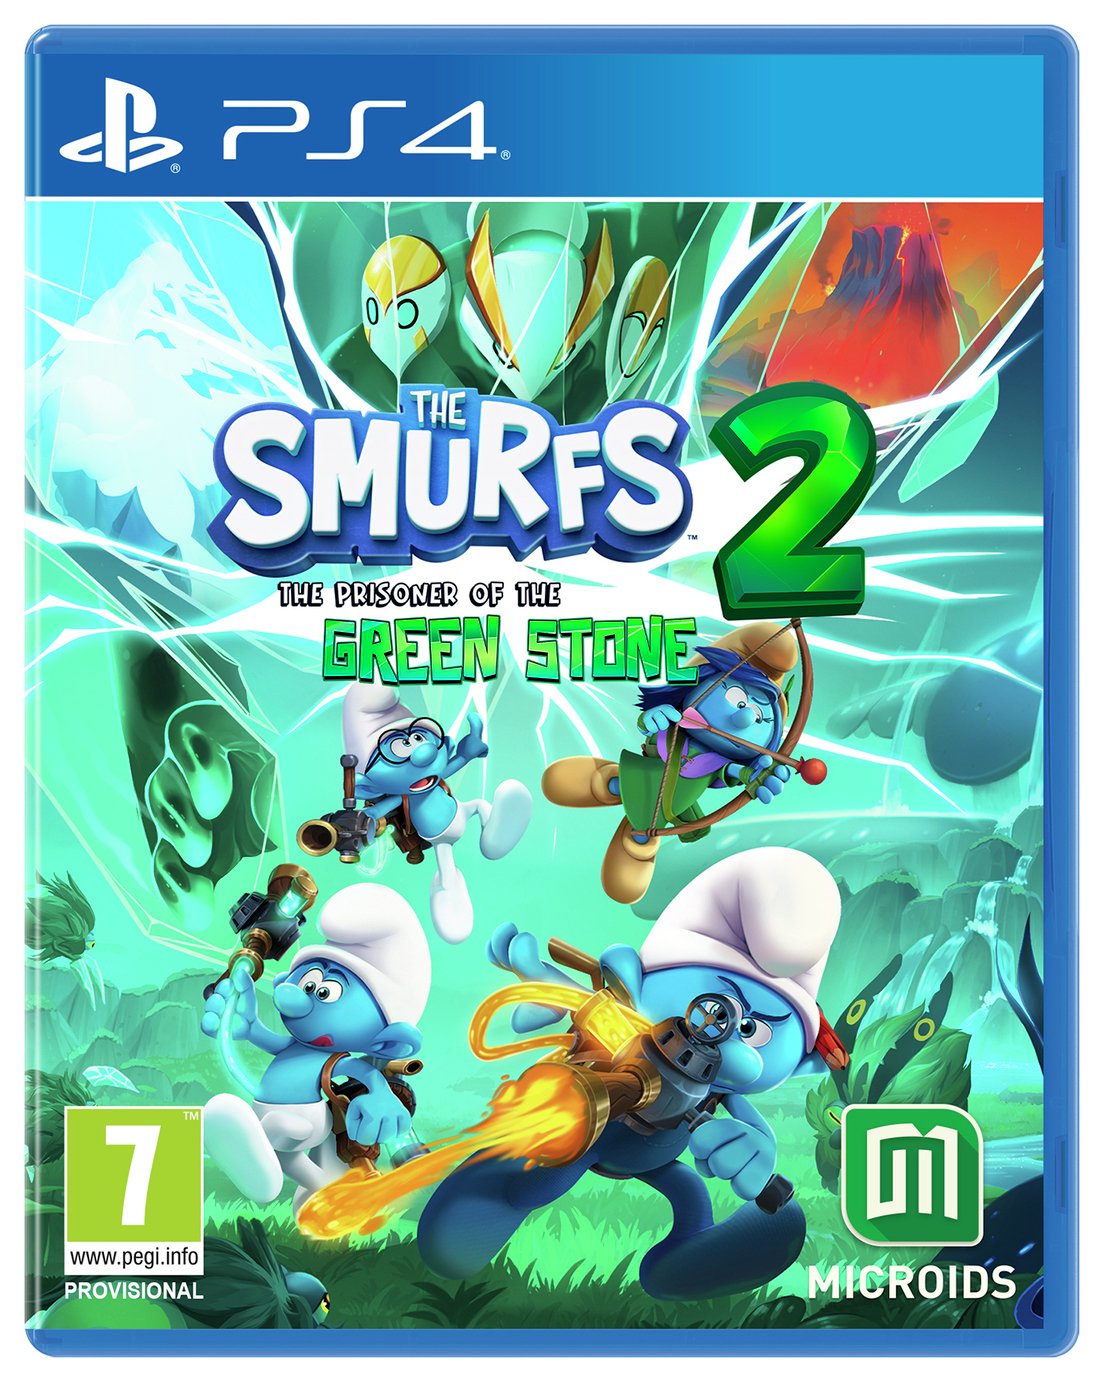 The Smurfs 2: The Prisoner Of The Green Stone PS4 Game